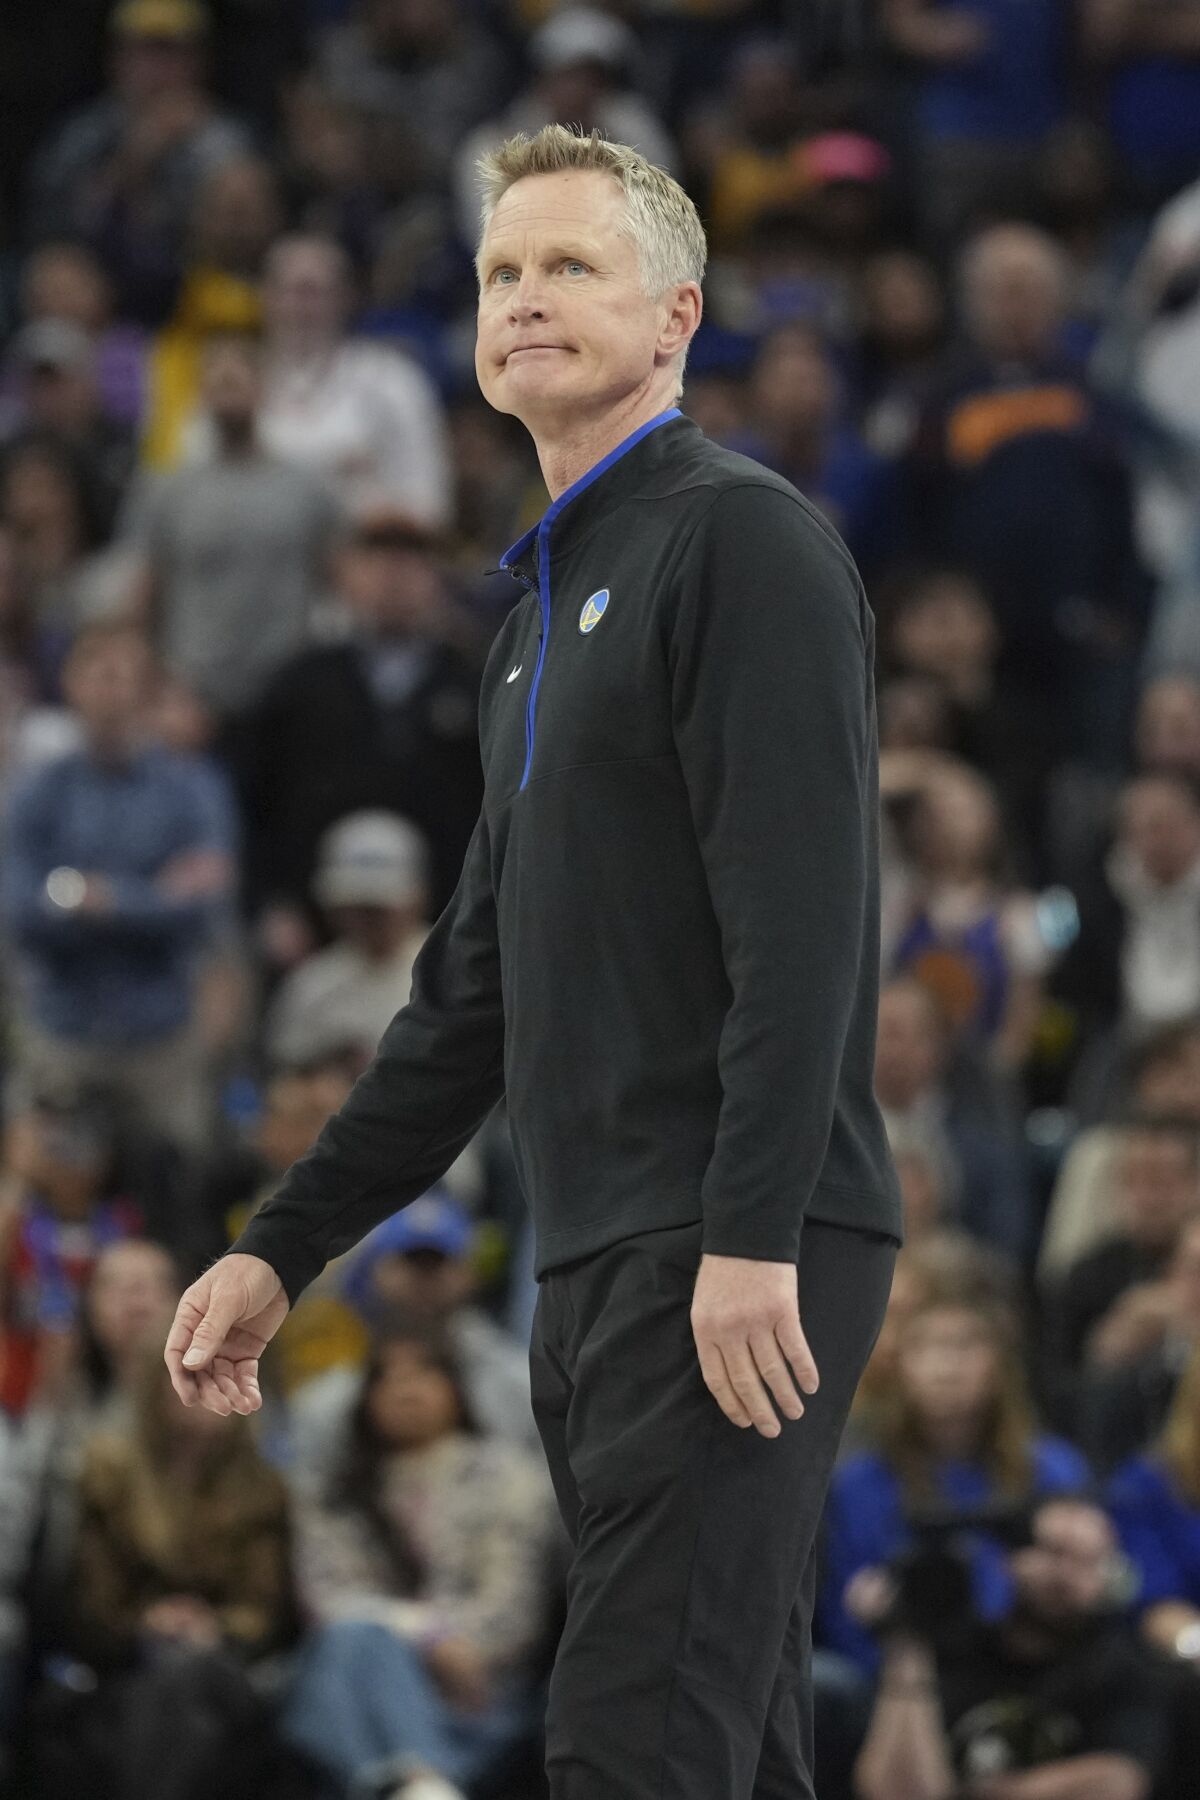 Golden State Warriors coach Steve Kerr watches play as he stands on the sideline.